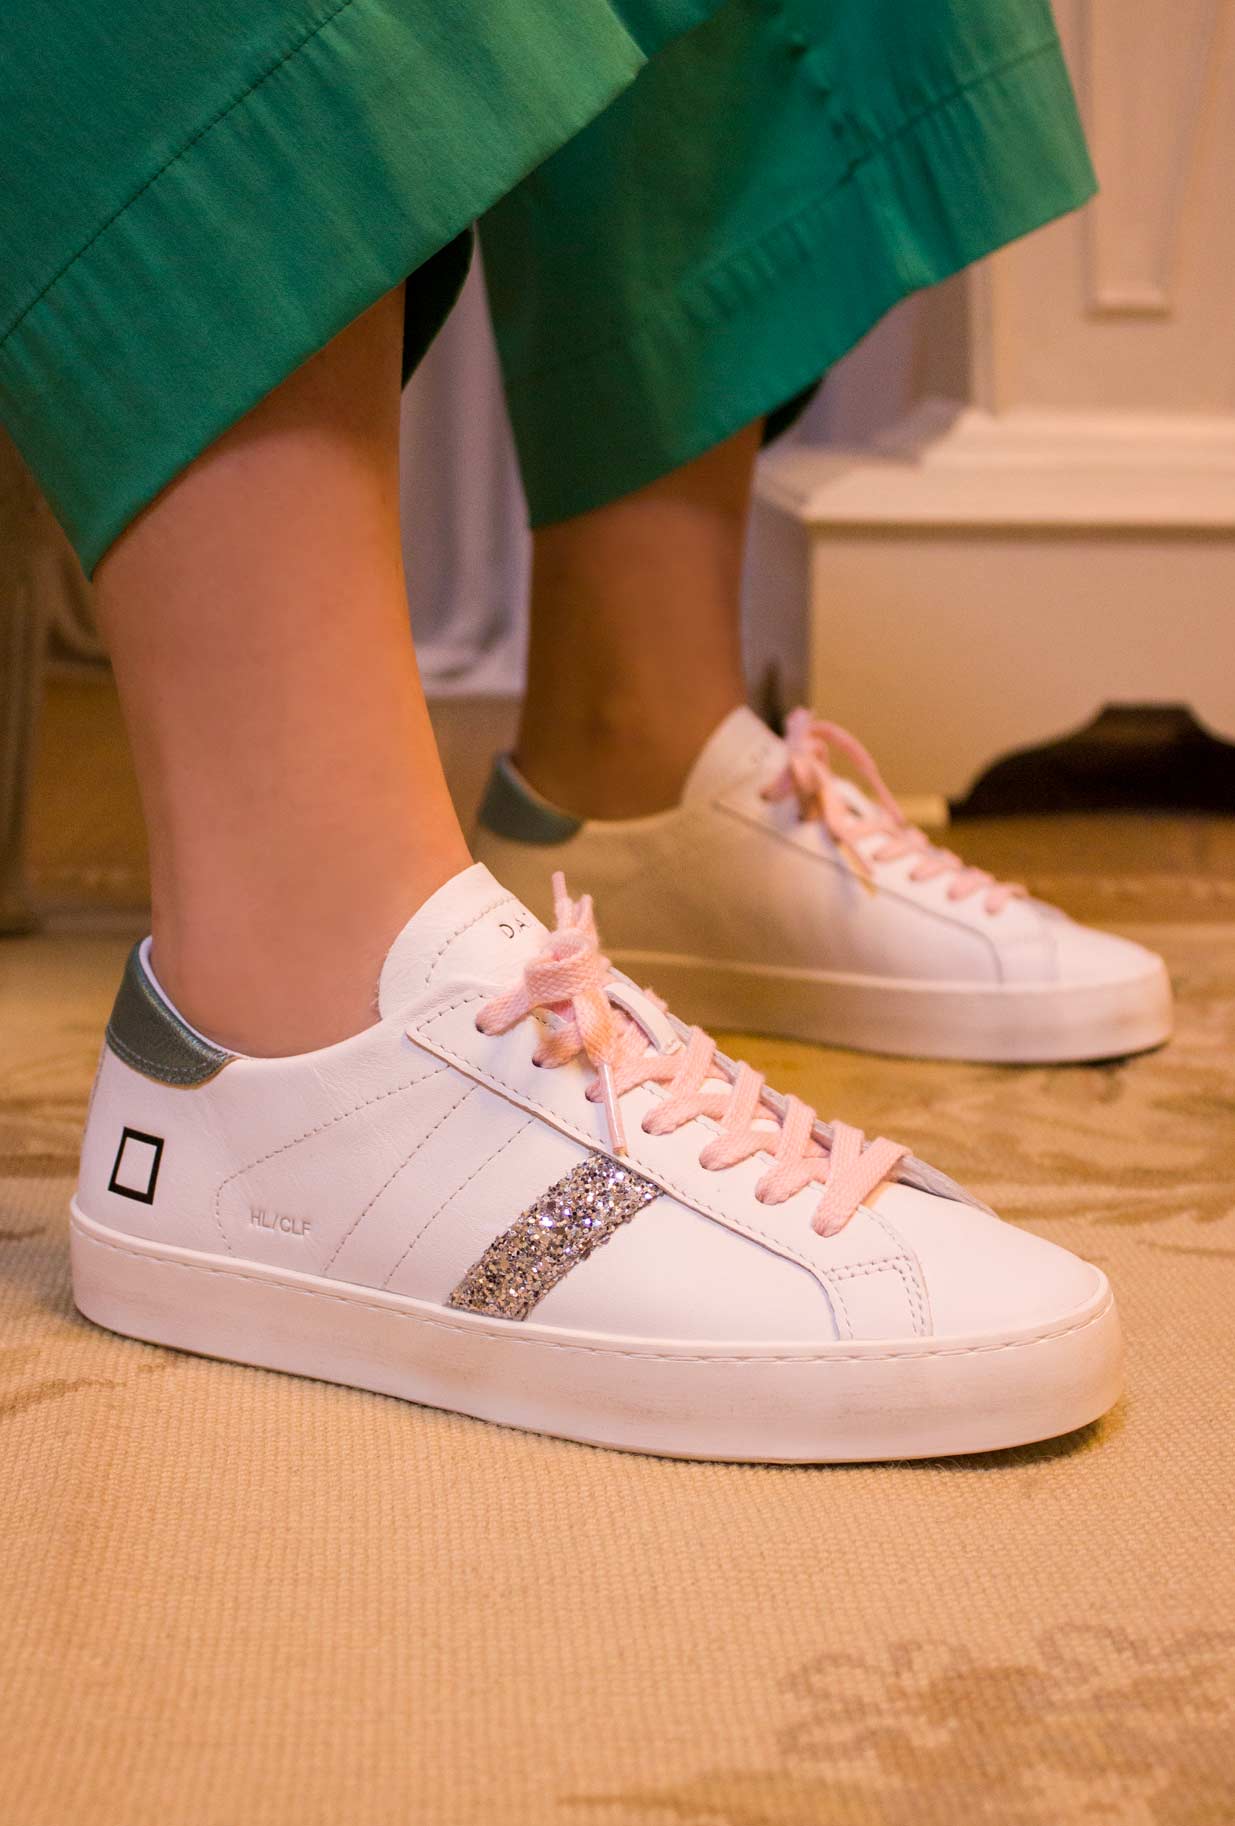 Date Sneakers Donna Hill Low Calf White Green